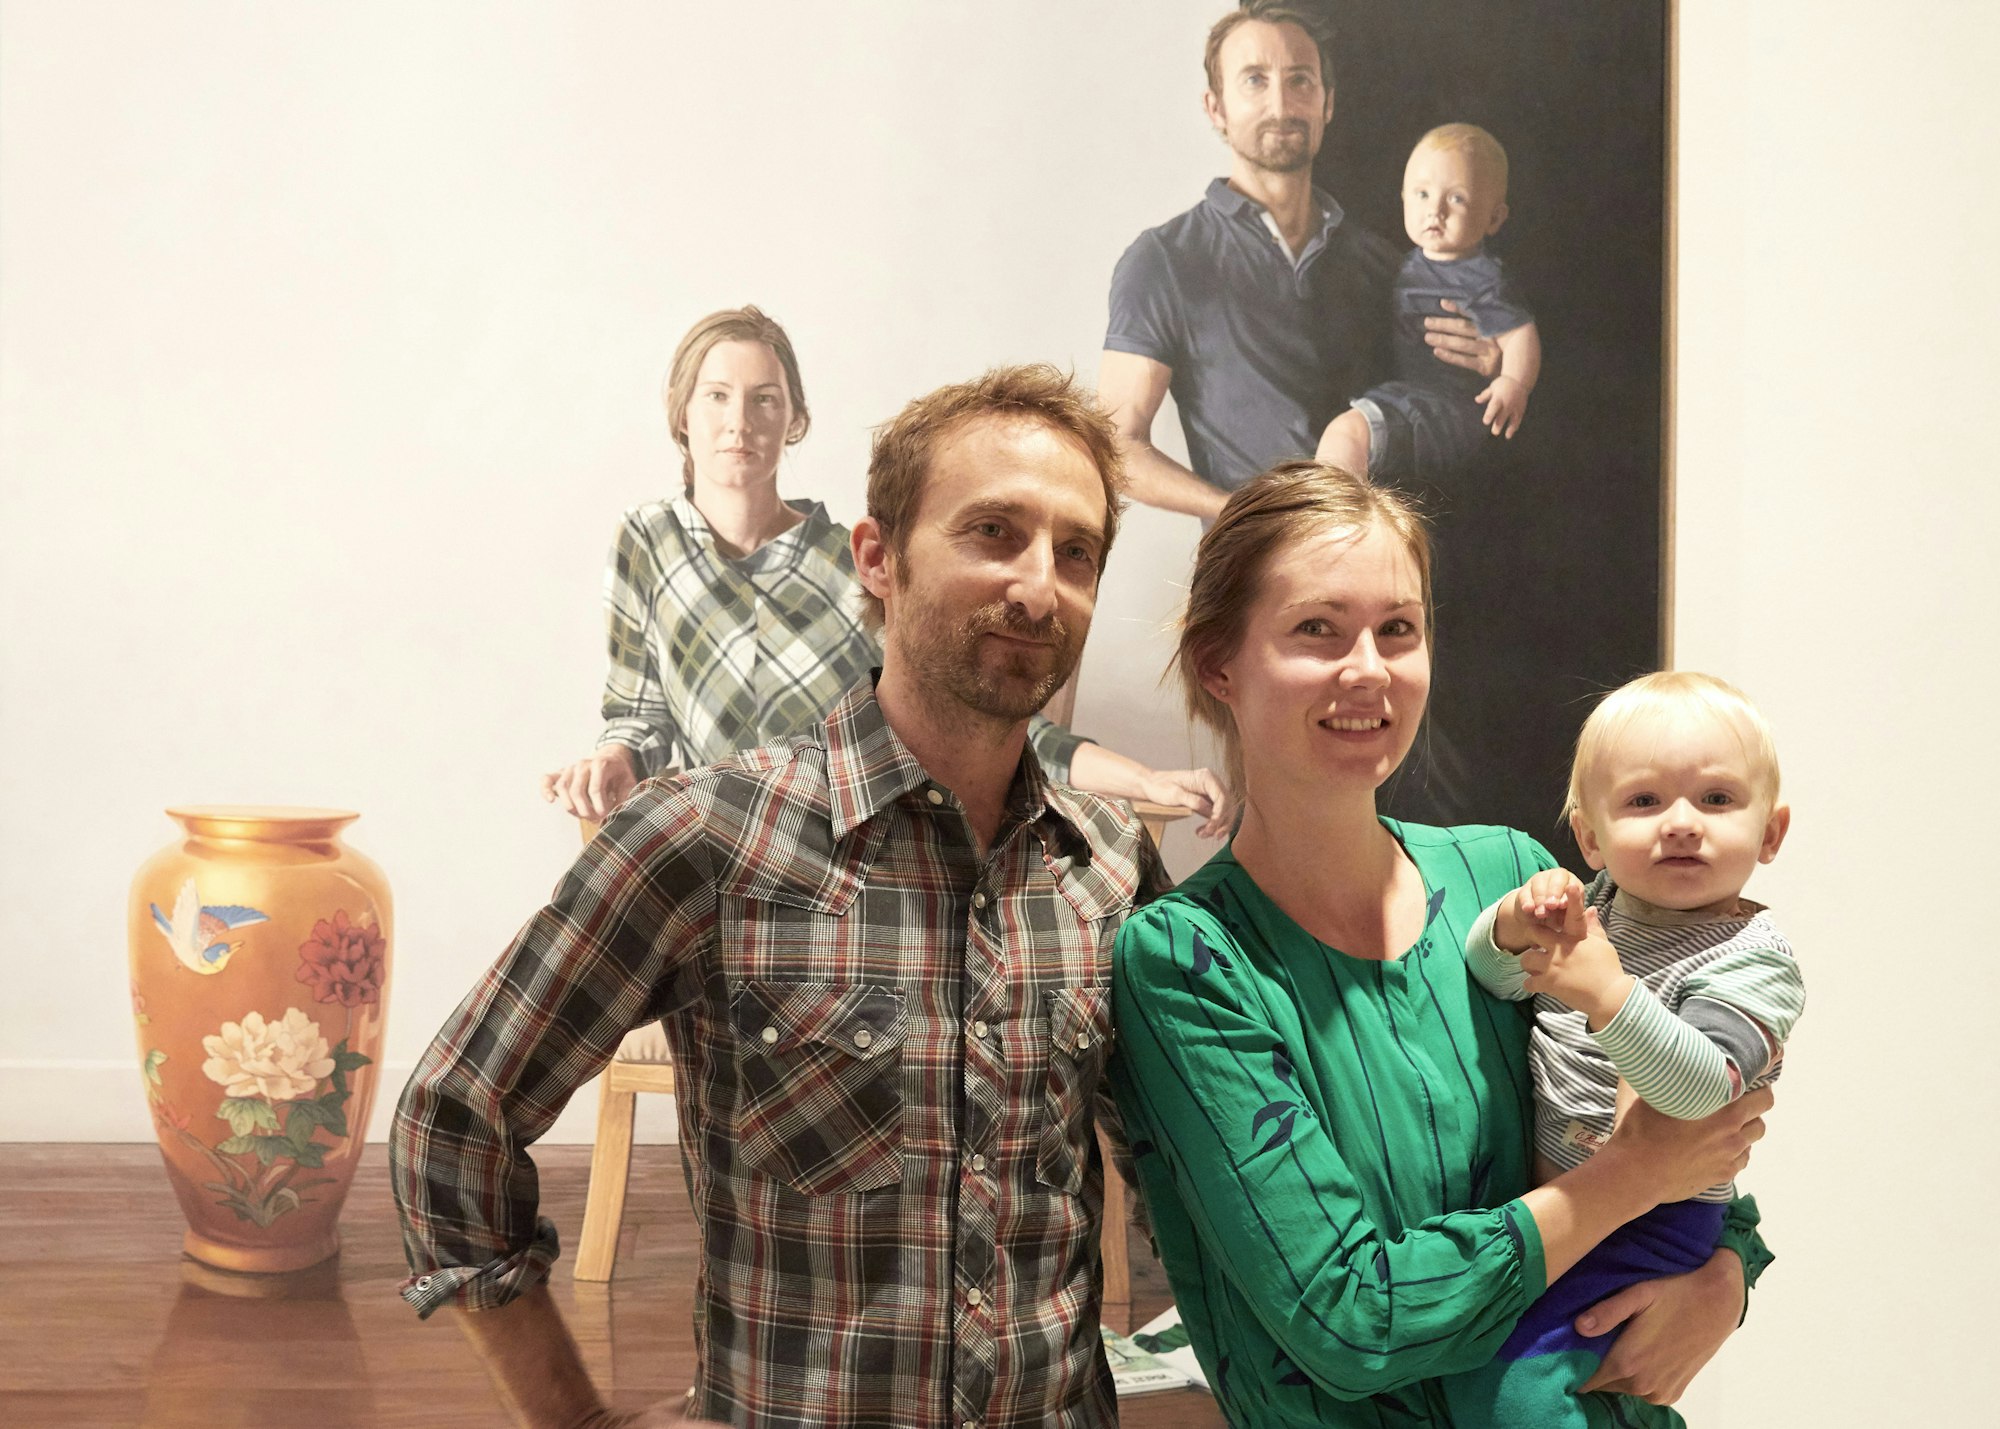 Two people, one holding a baby, stand in front of a painting in which all three are depicted